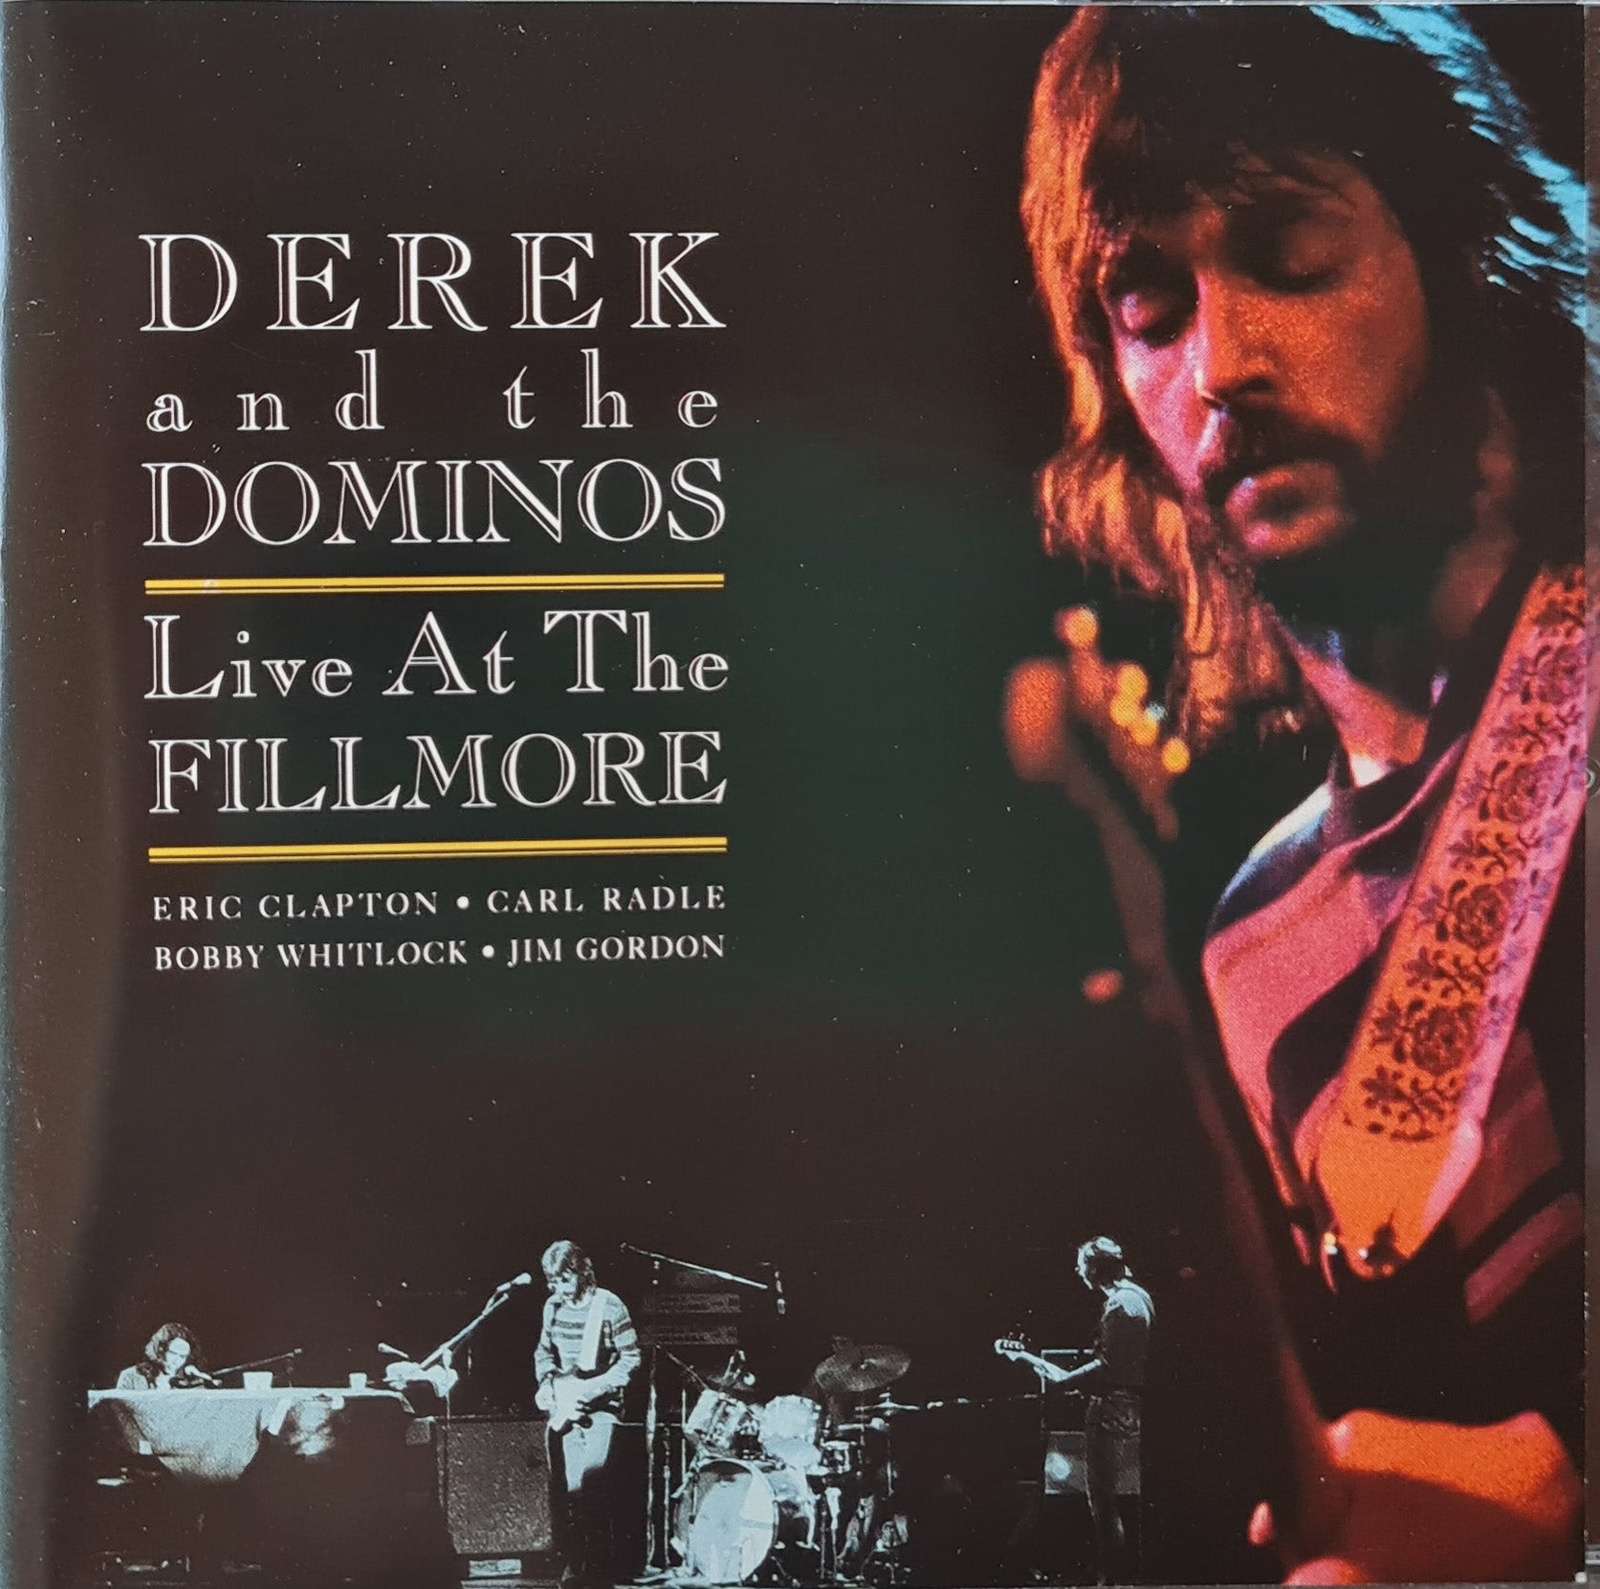 Derek and the Dominos - Live at the Fillmore (CD)